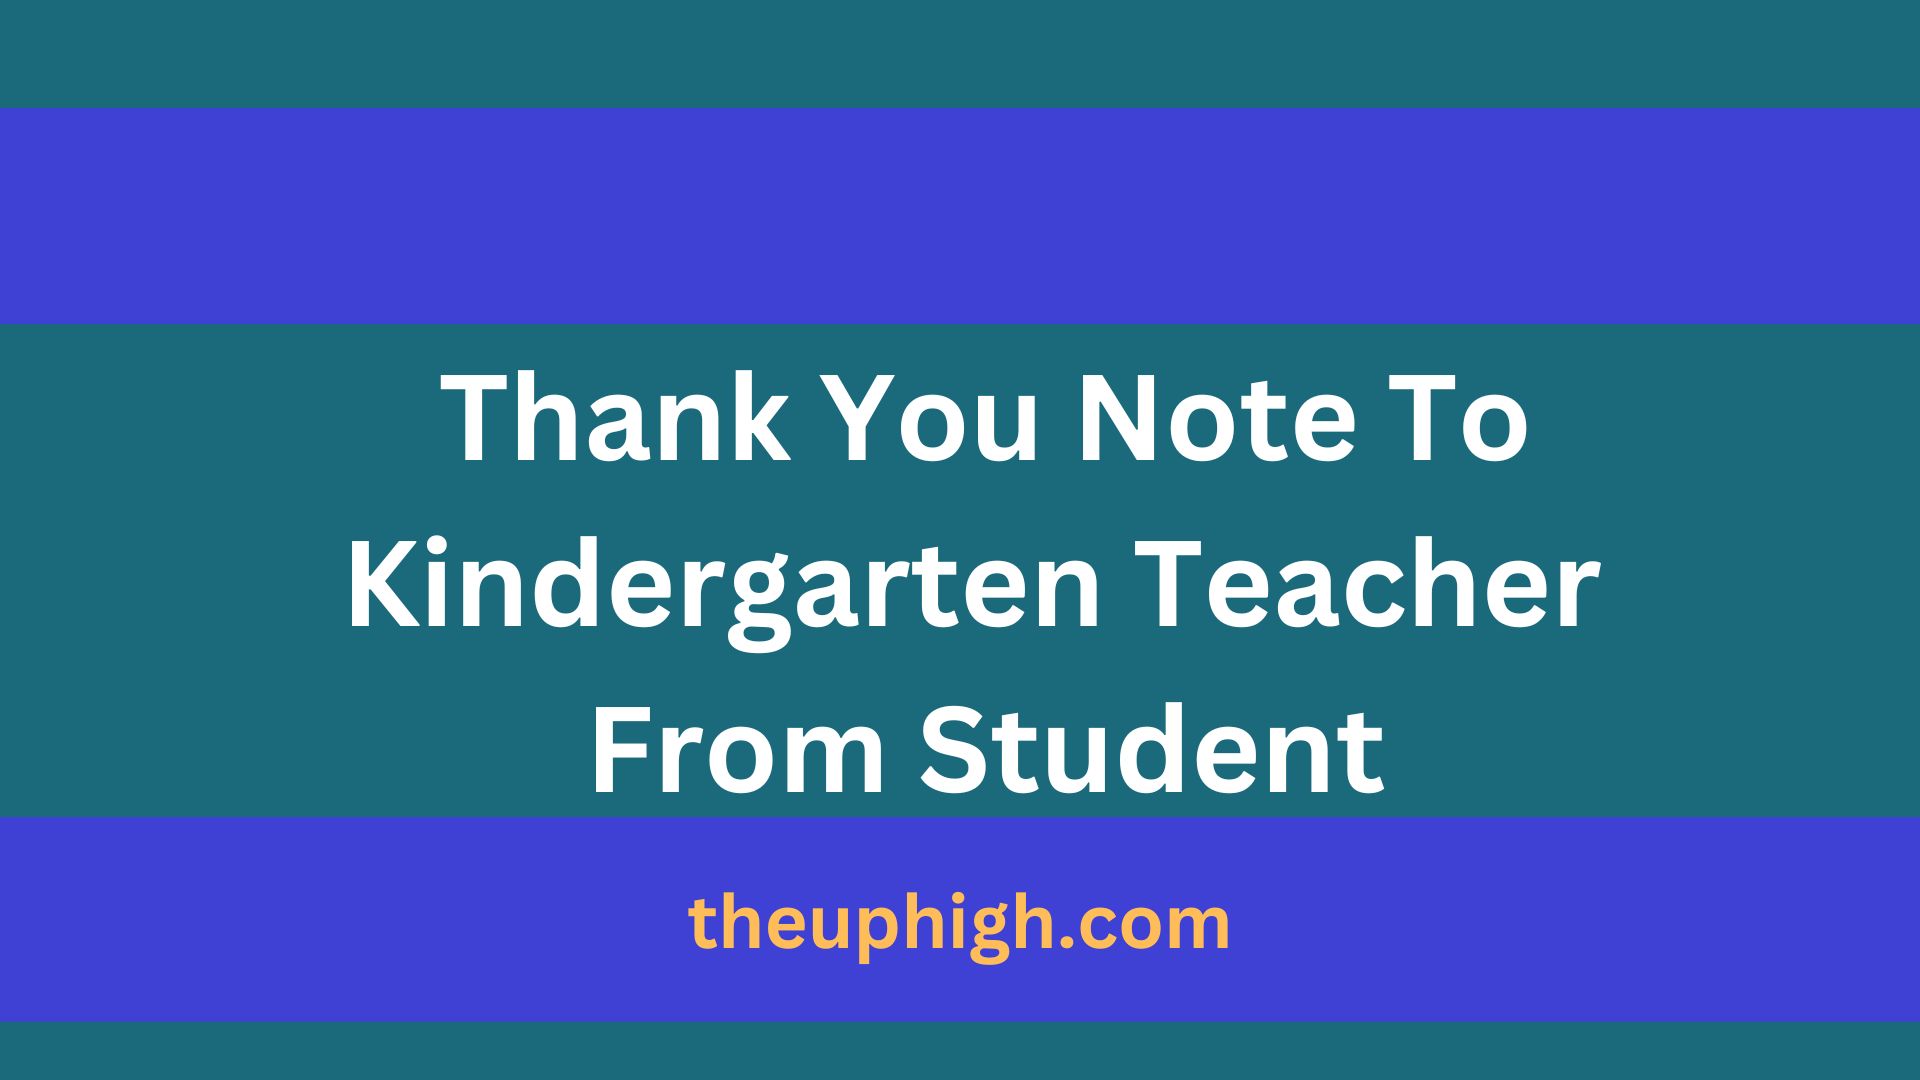 Thank You Note To Kindergarten Teacher From Student